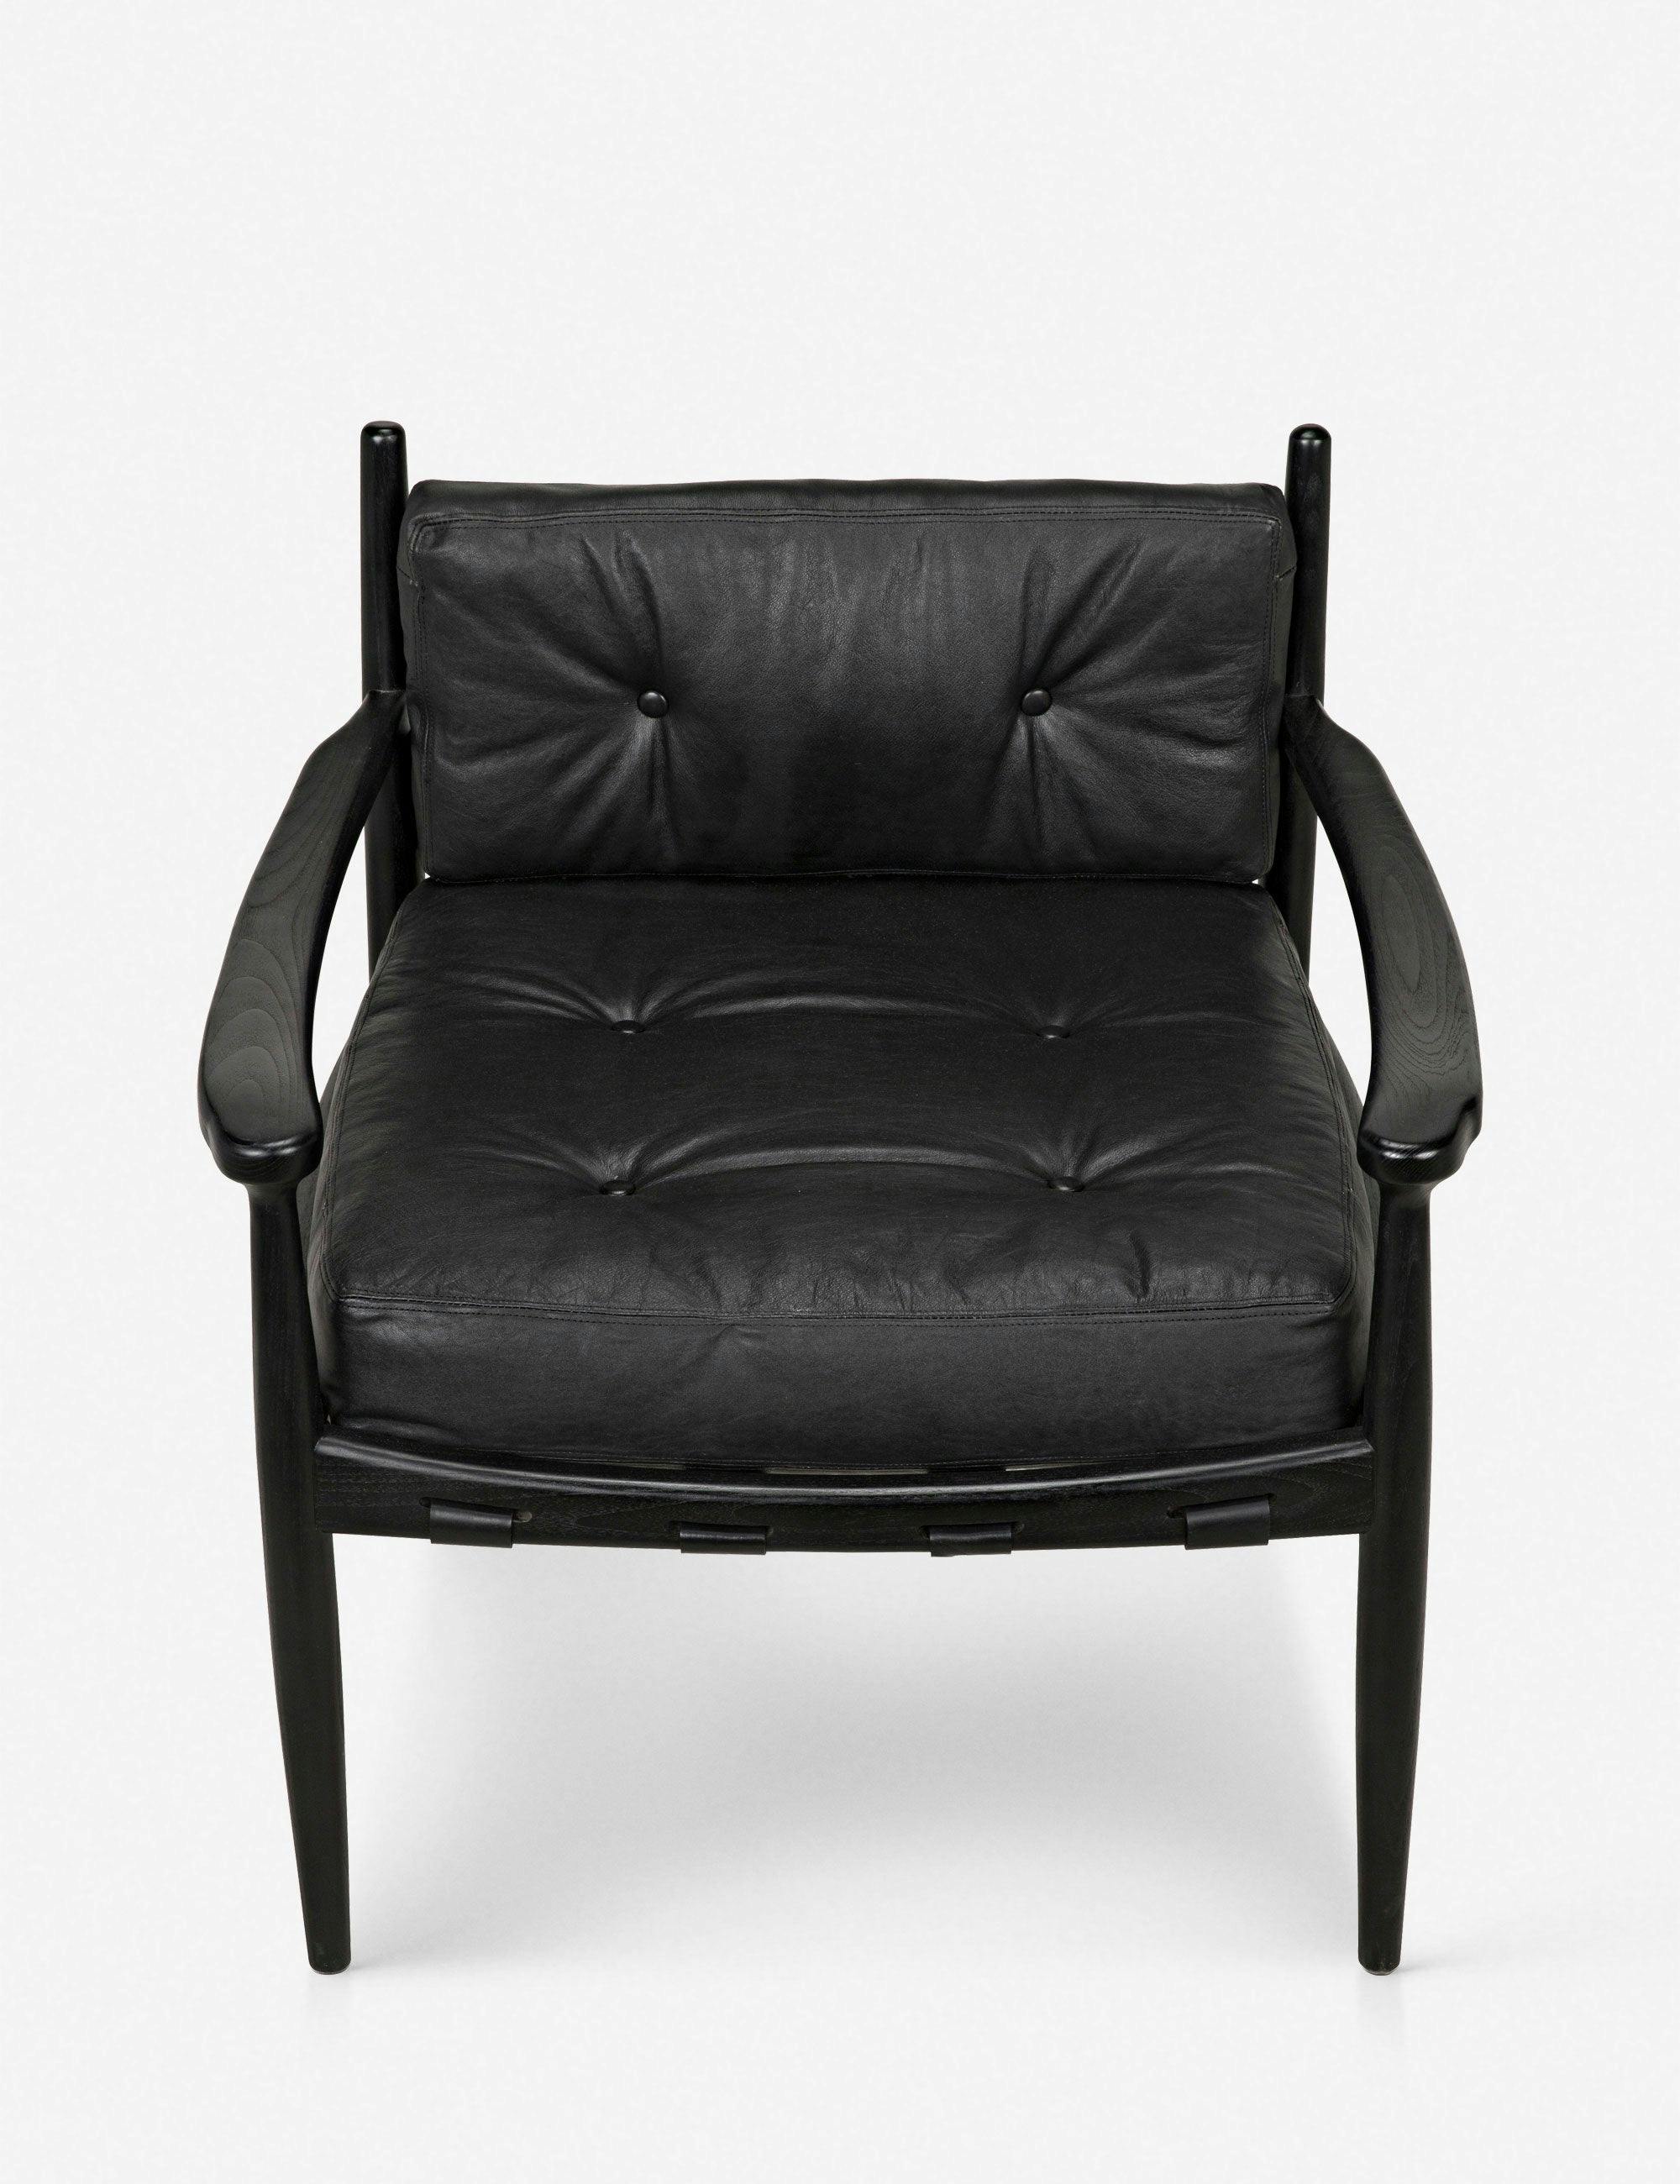 Kady Noir Handcrafted Black Leather Lounge Chair with Sungkai Wood Base